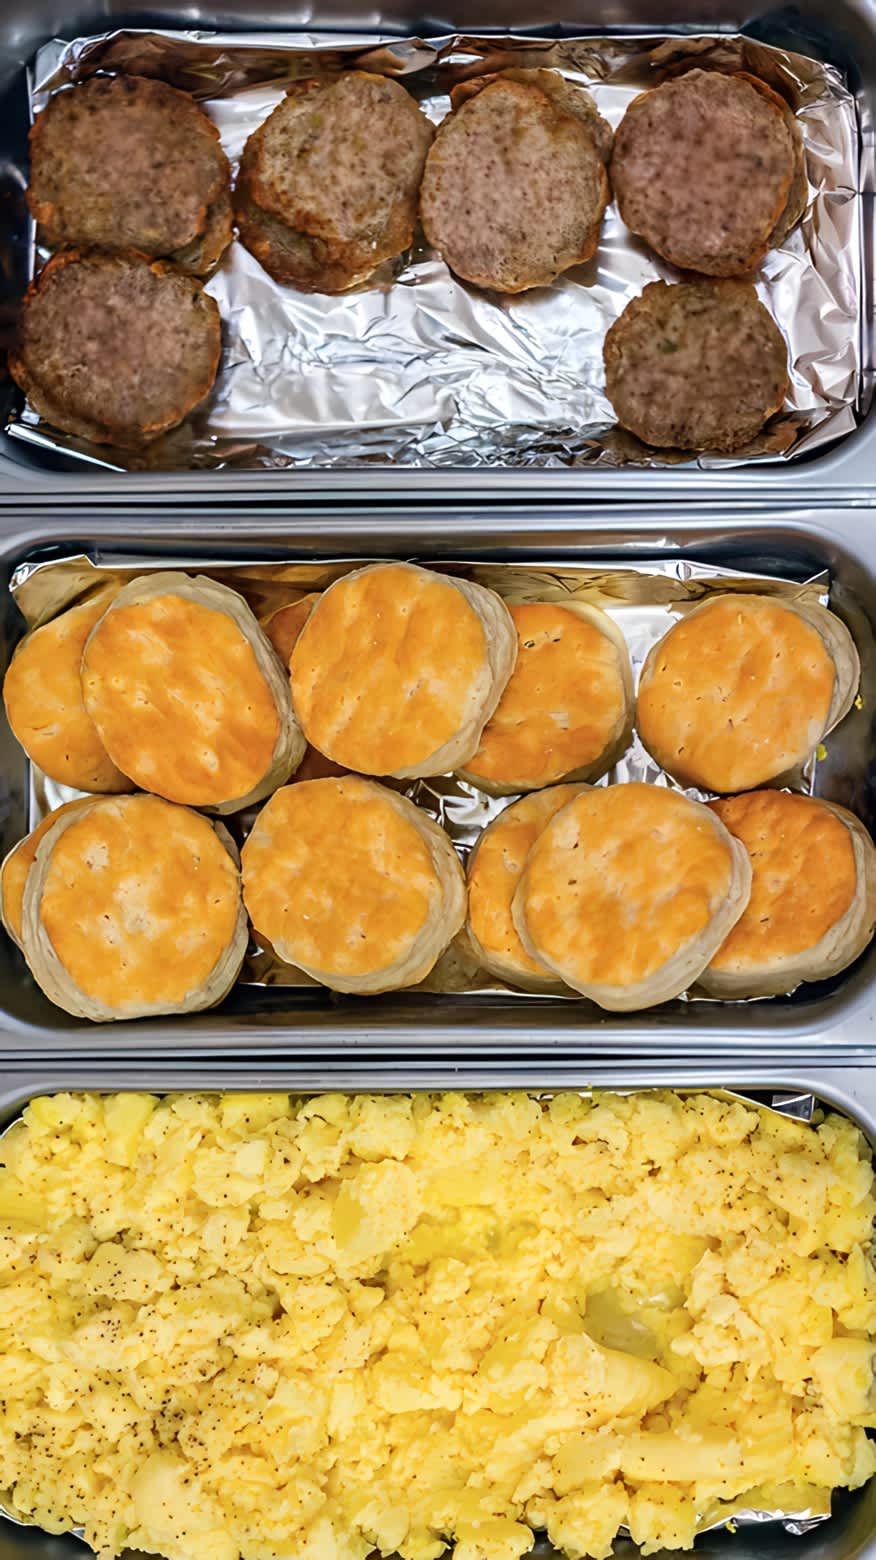 Sausage, biscuits, and eggs in aluminum containers 